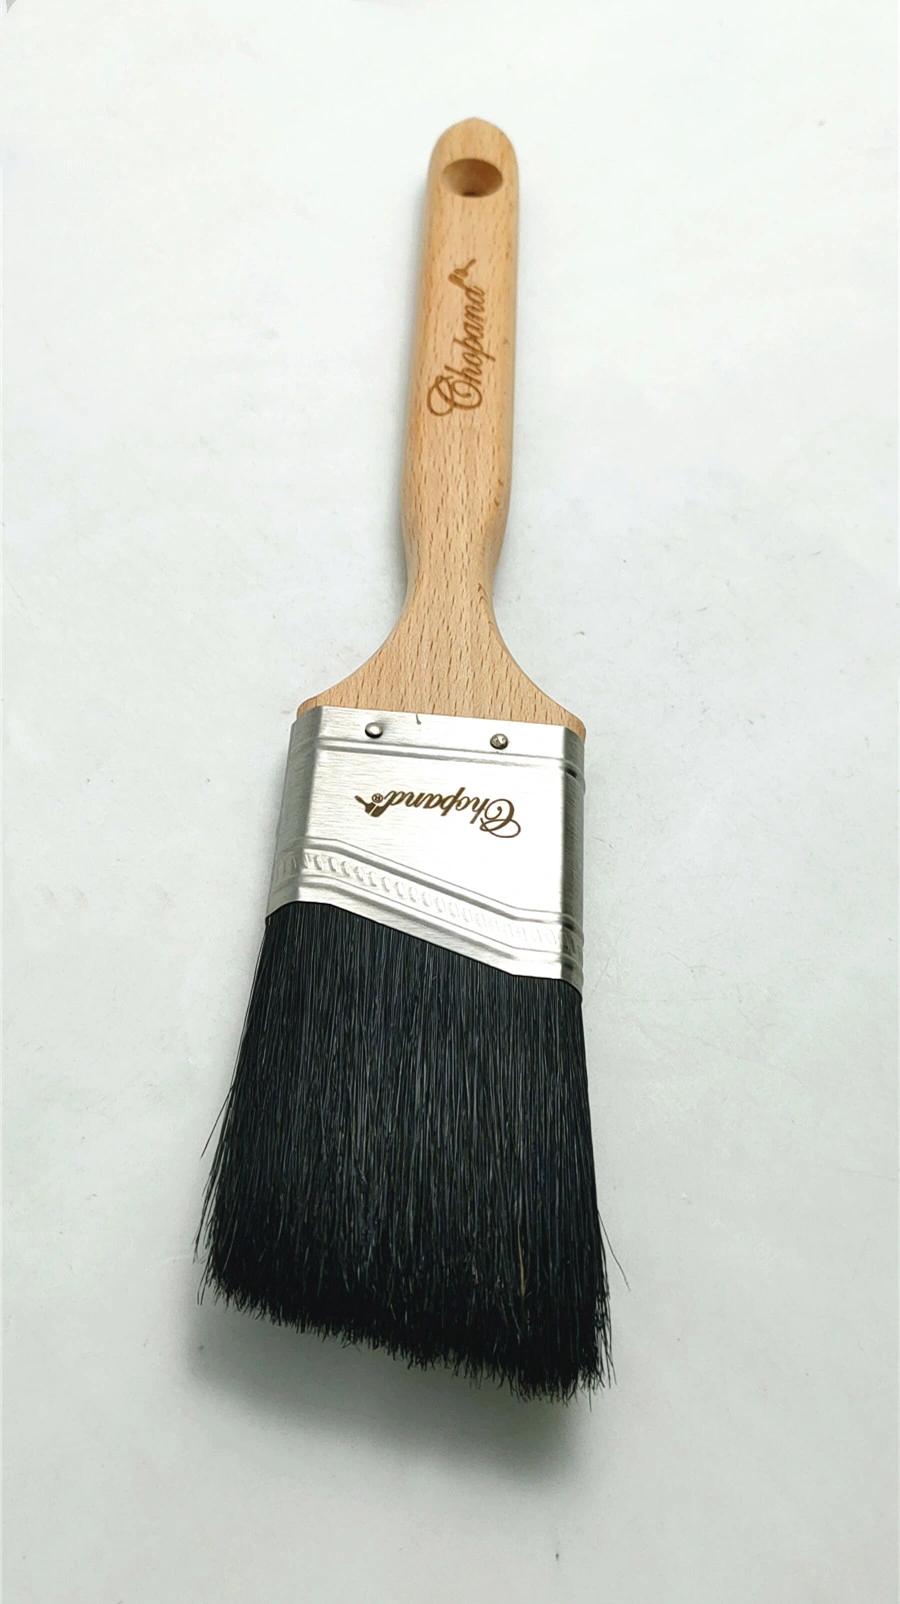 Chopand 2 Inches Cheap Price Angle Paint Brush Using Gray Filament